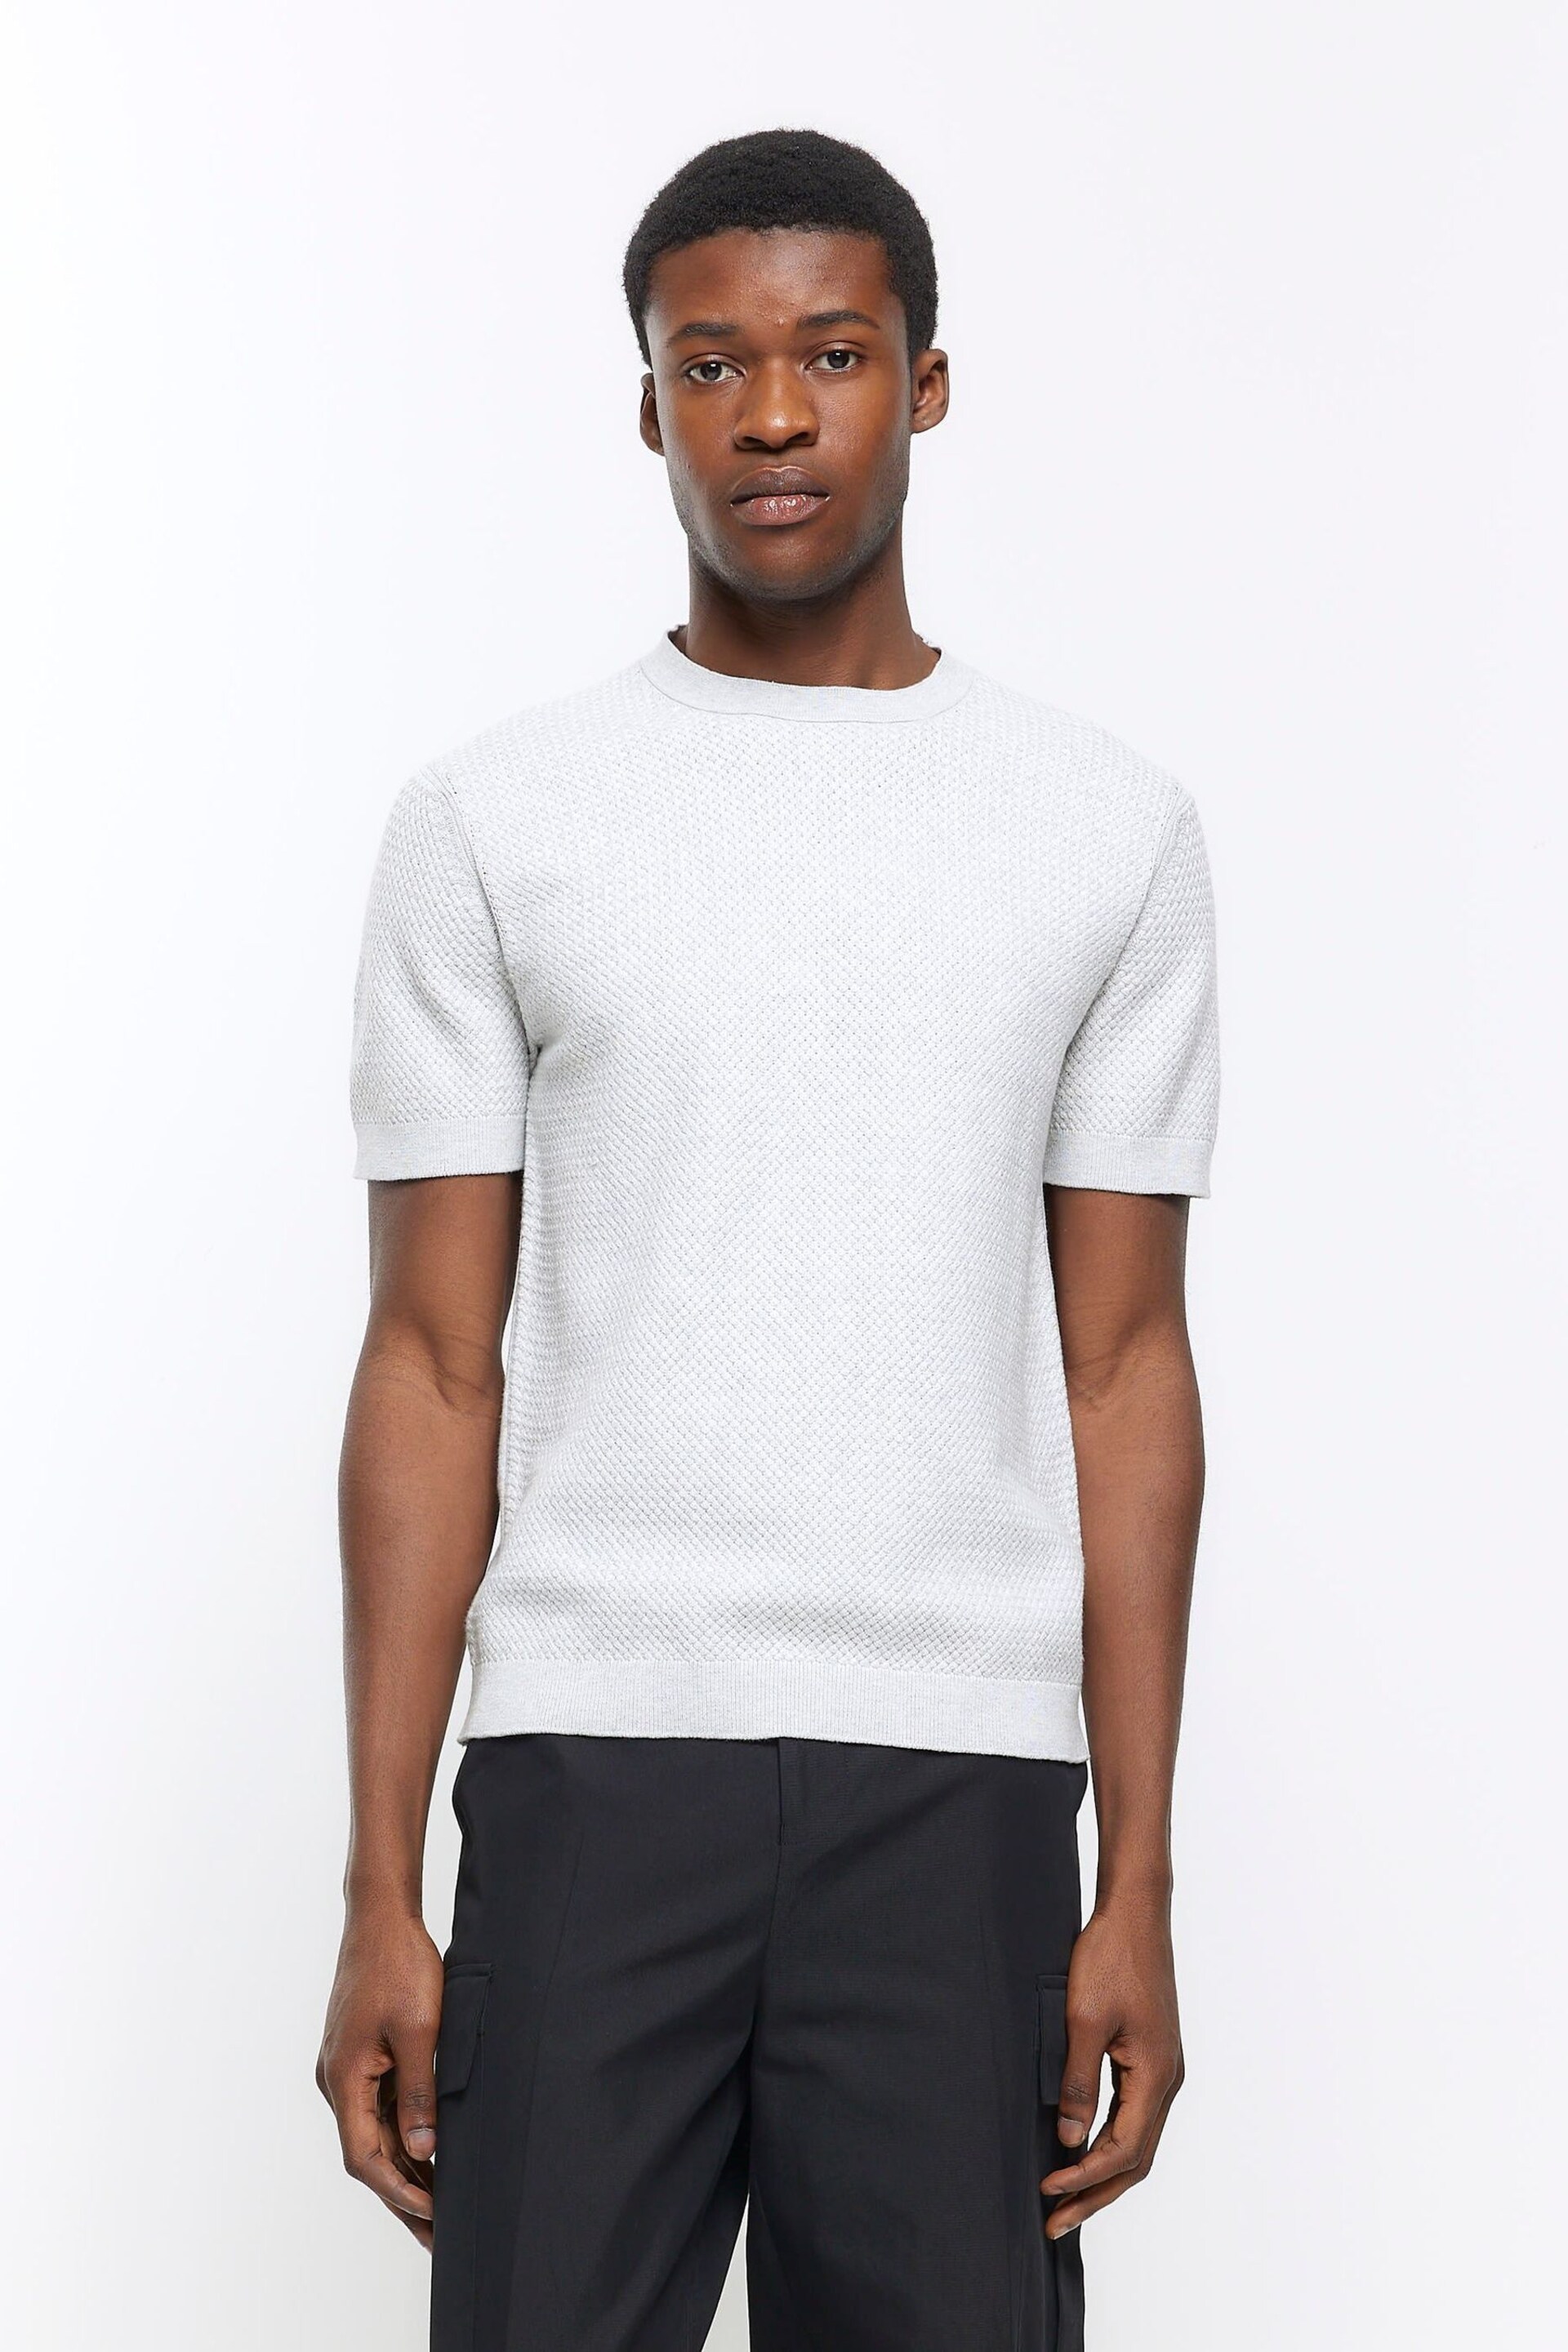 River Island Grey Textured Knitted T-Shirt - Image 1 of 4